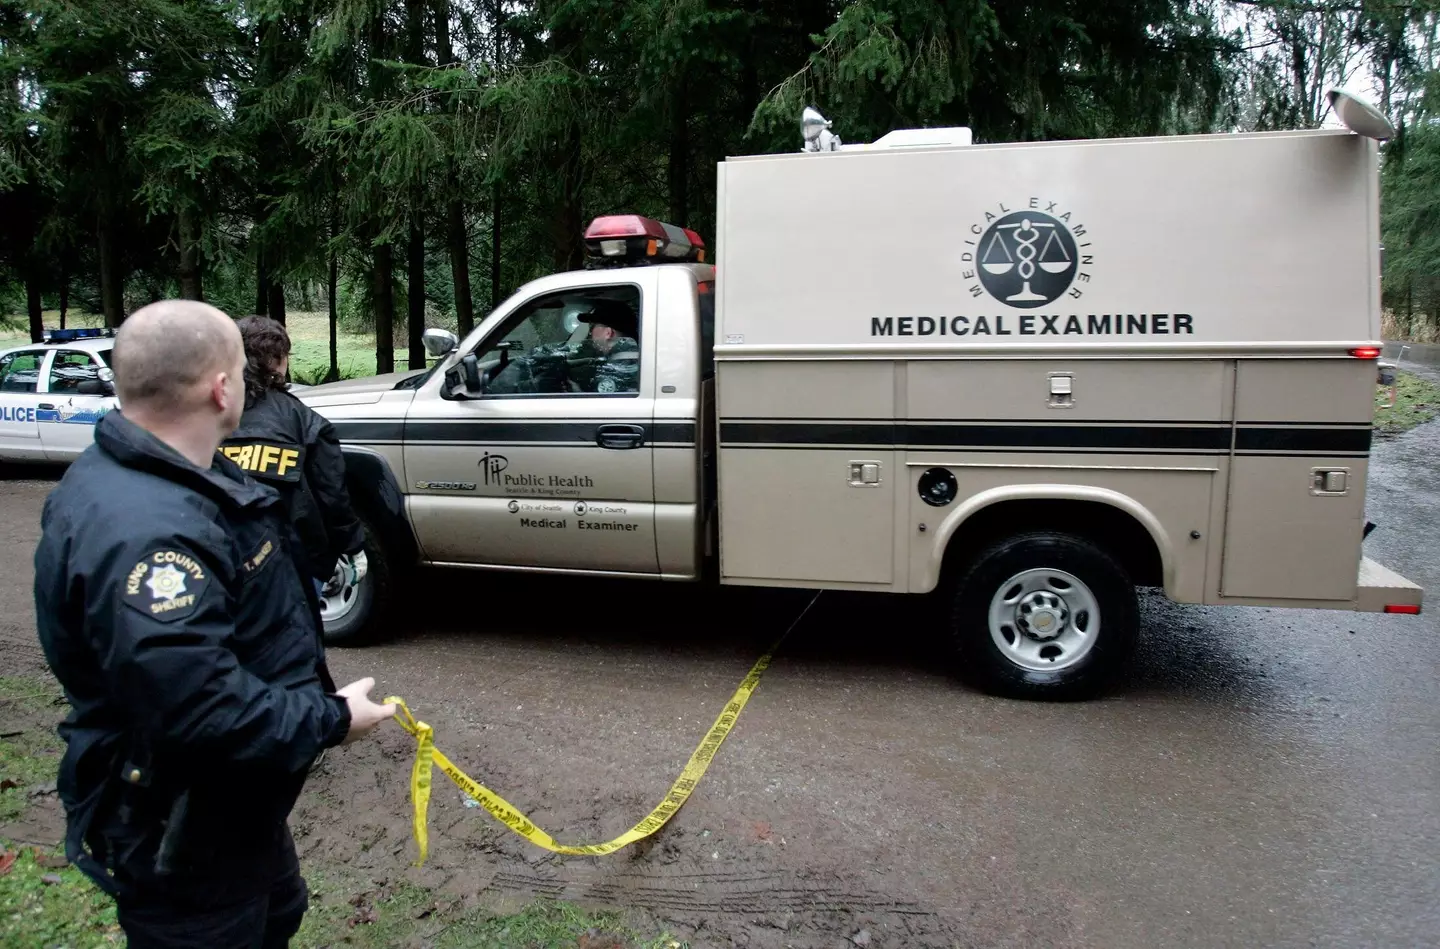 King County Medical Examiner's Office identified the remains found in the two bin bags.